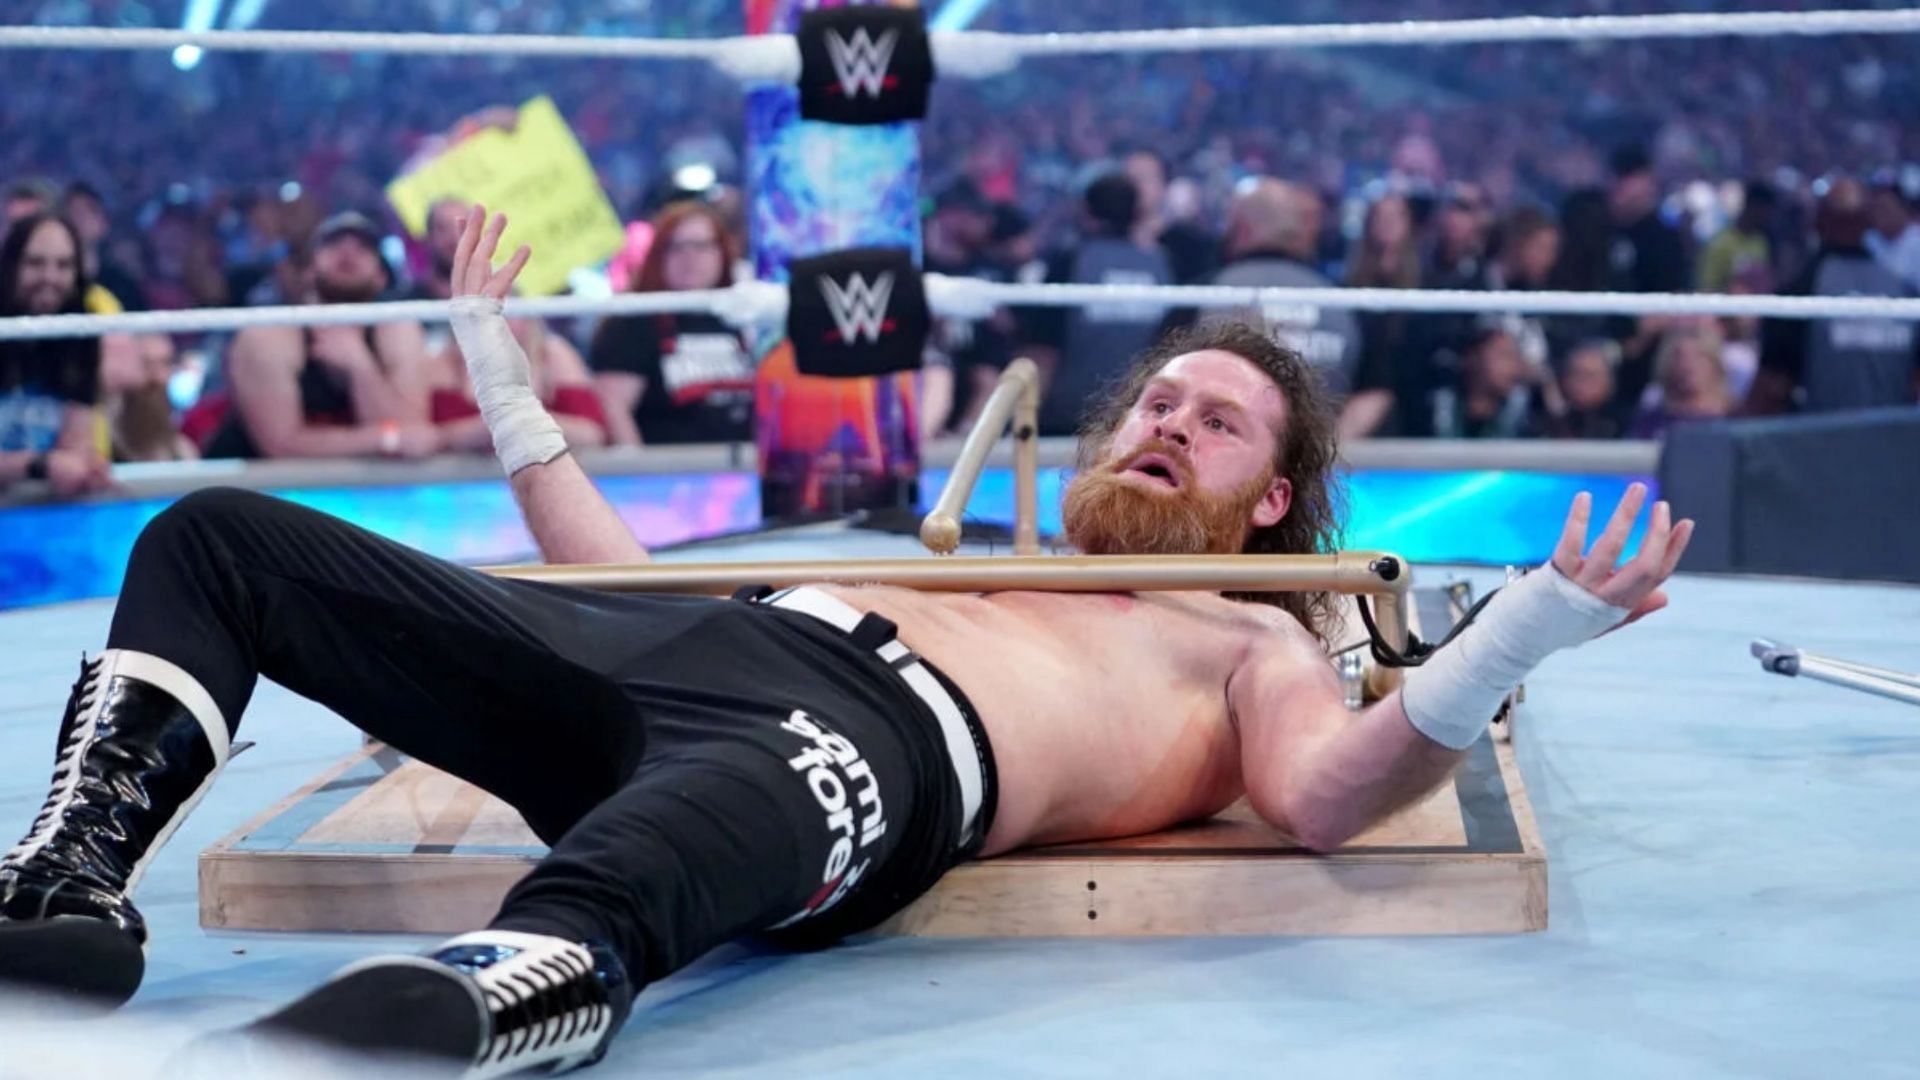 Sami Zayn reacts after losing his match against Johnny Knoxville at WrestleMania 38.